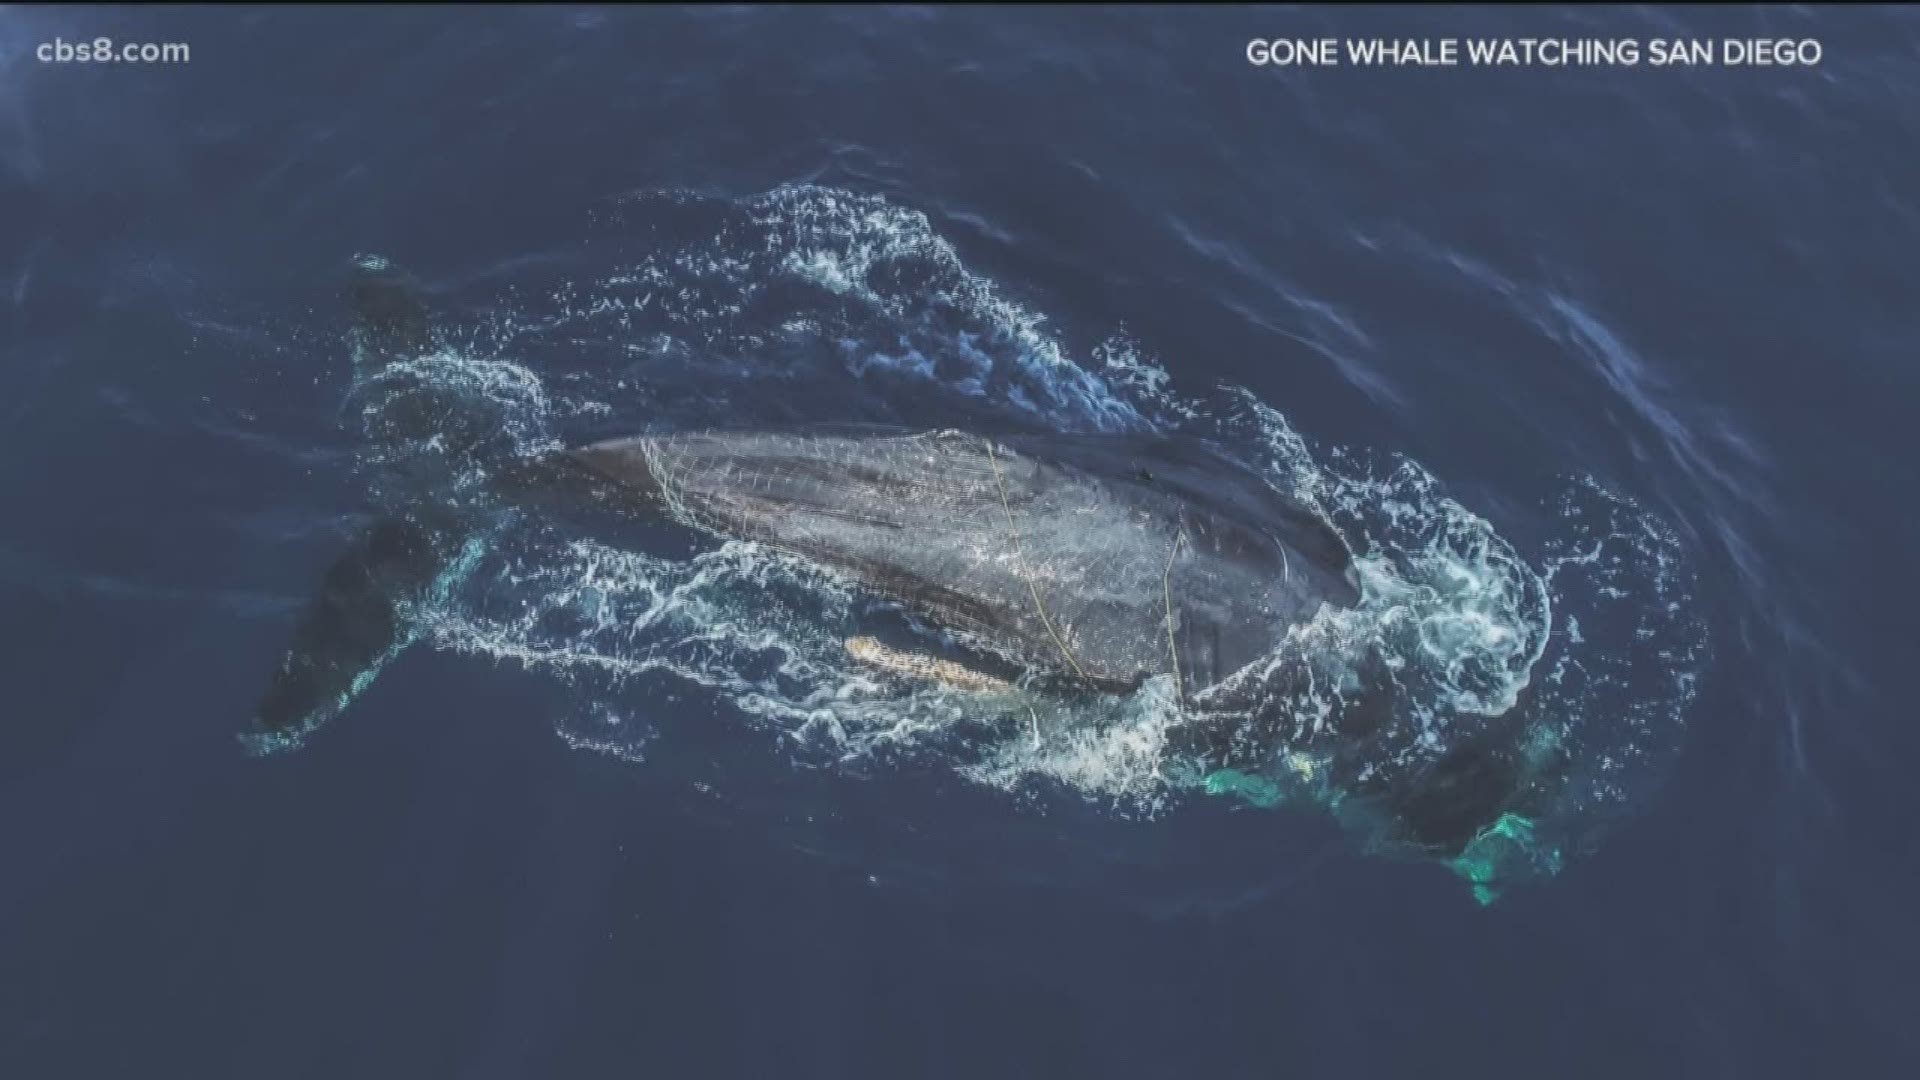 Pictures from the incident show a disturbing scene as a humpback whale is seen entangled in a net off the San Diego coast.